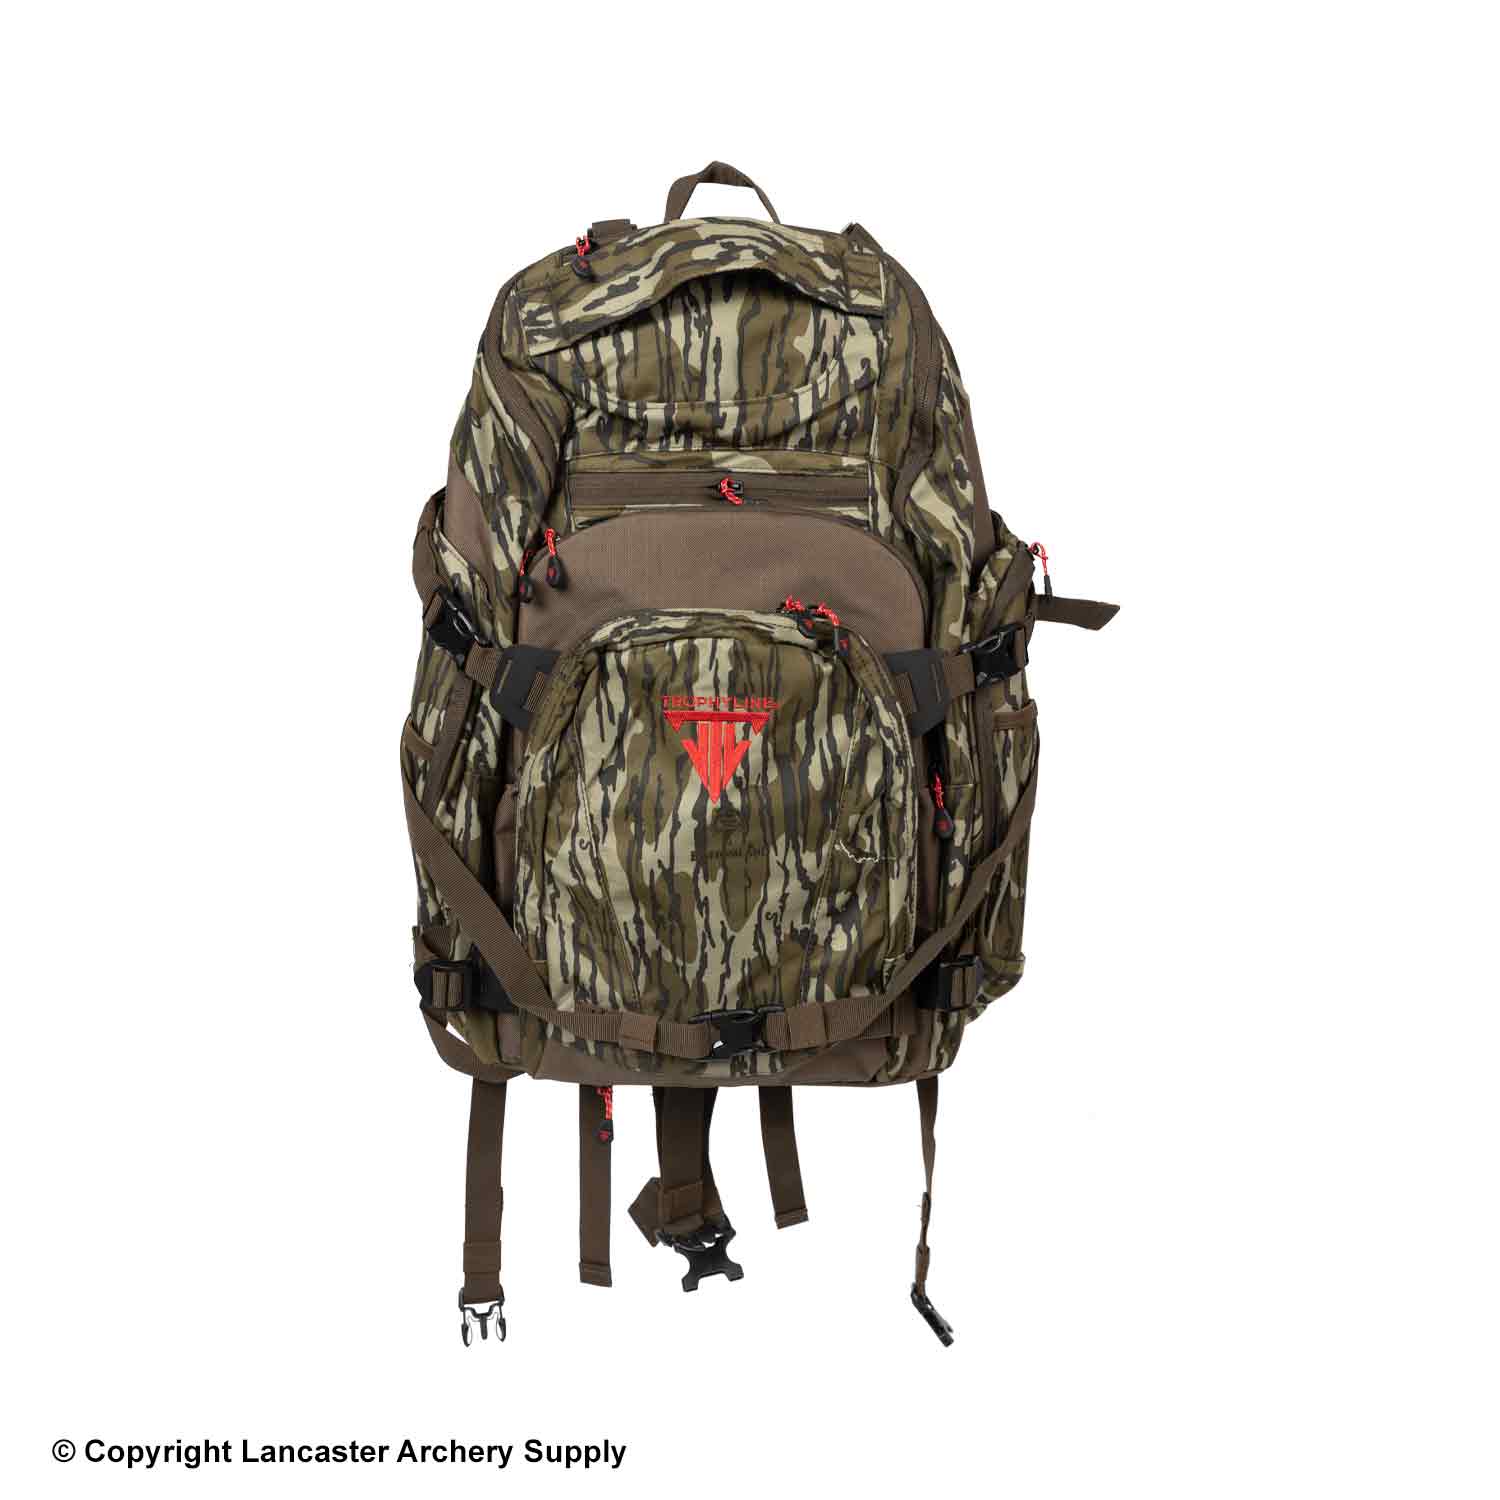 Trophyline CAYS 2.0 Backpack (Open Box X1033350)